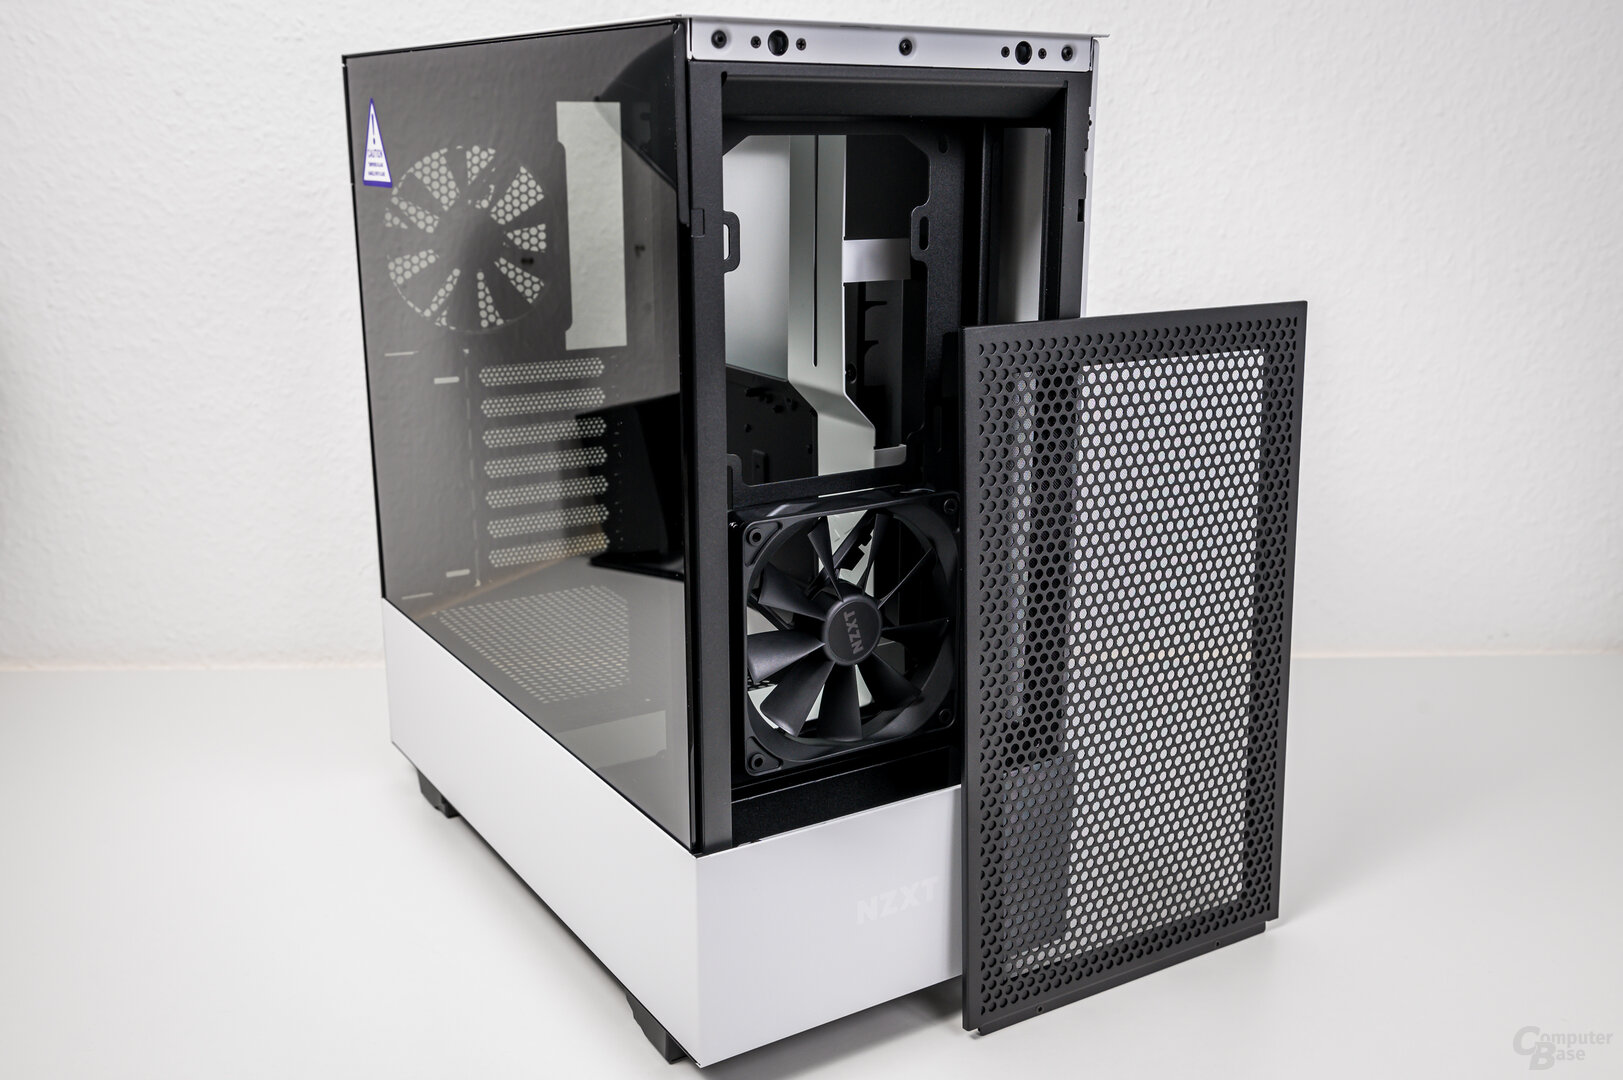 NZXT H510 Flow: Abnehmbares Frontelement mit Staubfilter